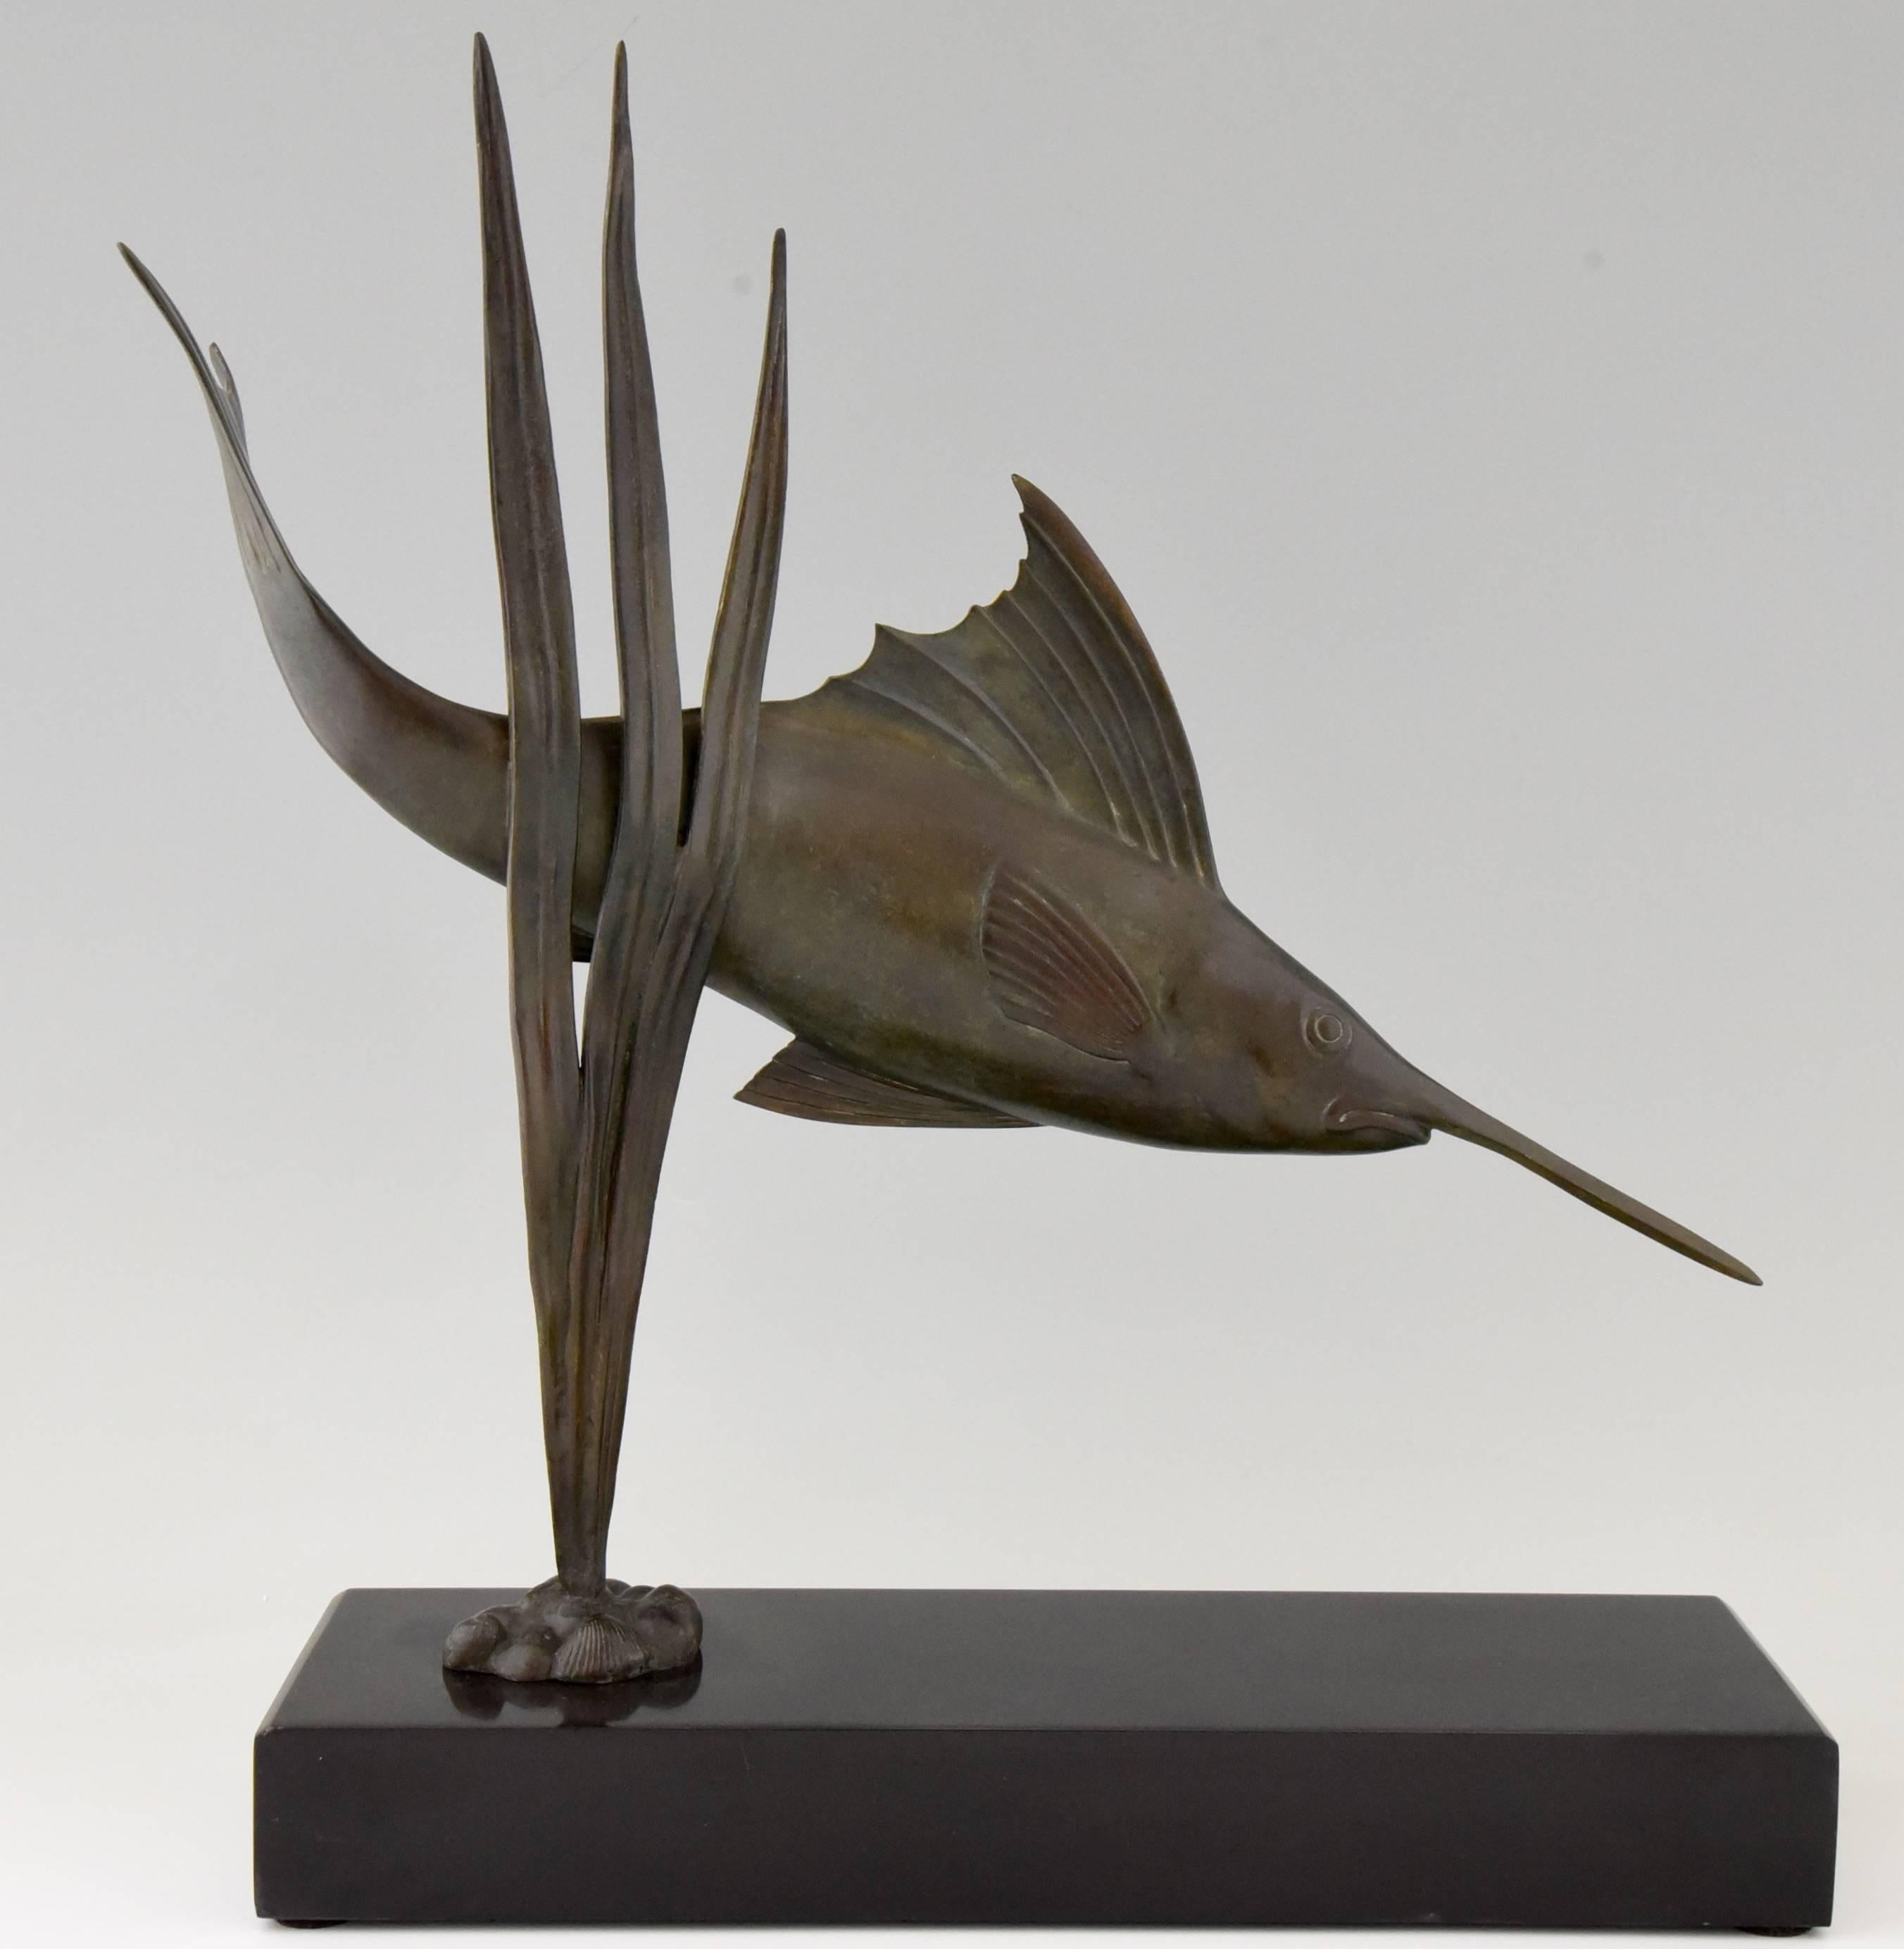 Beautiful Art Deco sculpture of a Swordfish between waterplants on a black marble base signed by I. Strateff.

Artist / maker:
Strateff.
Signature / marks:
I. Strateff.
Style:
Art Deco.
Date:
circa 1930.
Material:
Patinated bronze on a